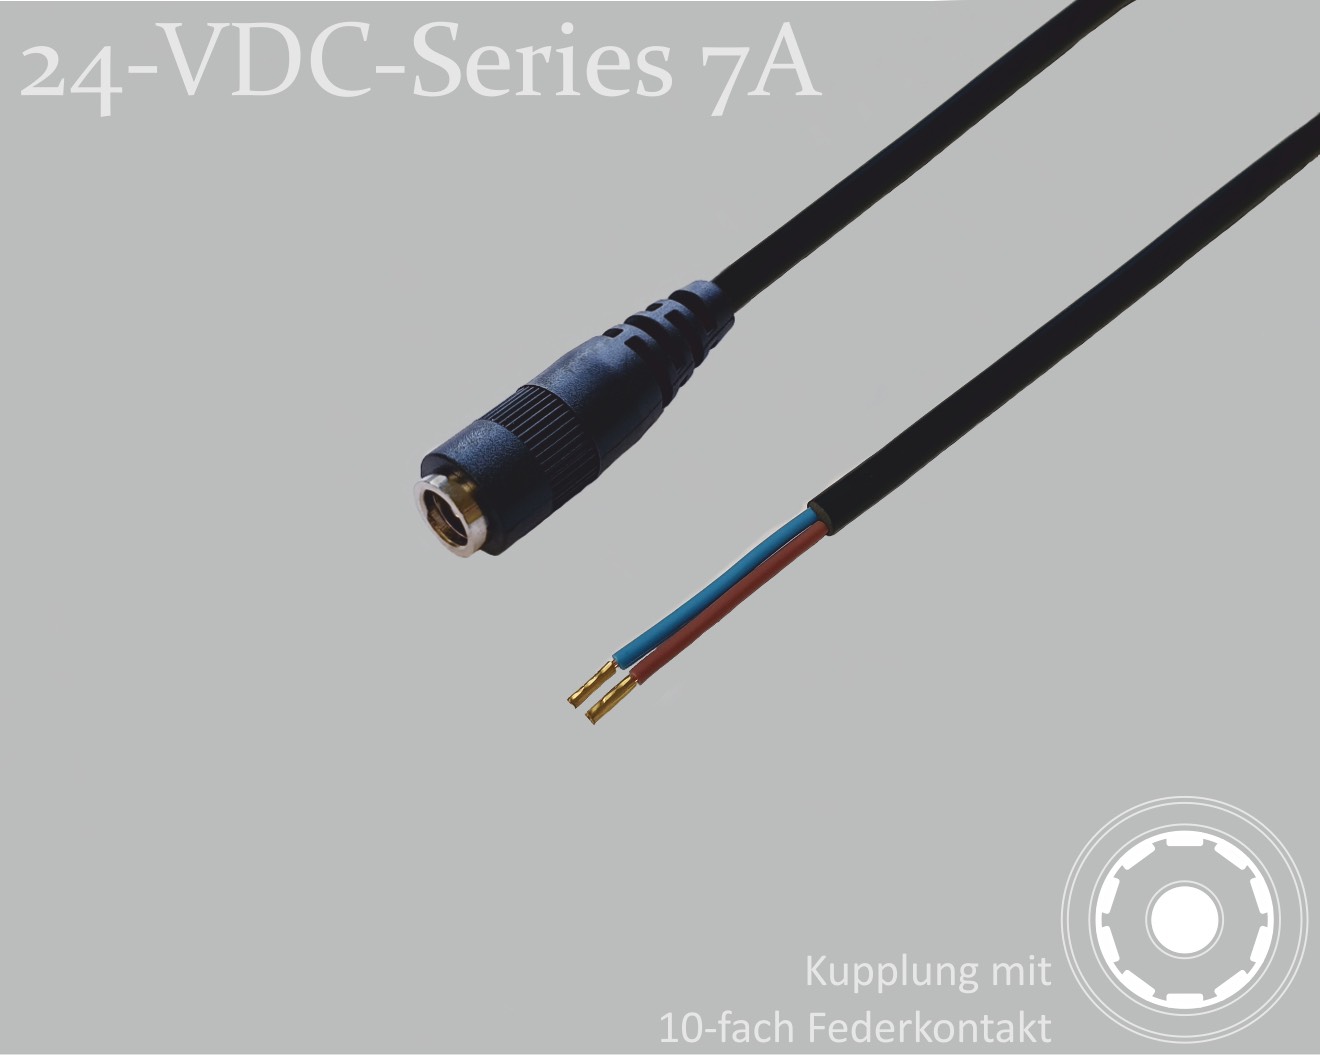 24-VDC-Series 7A, DC connection cable, DC coupling with 10-spring contact 2.1x5.5mm, round cable 2x0.50mm², black, wire end sleeves, 1.5m